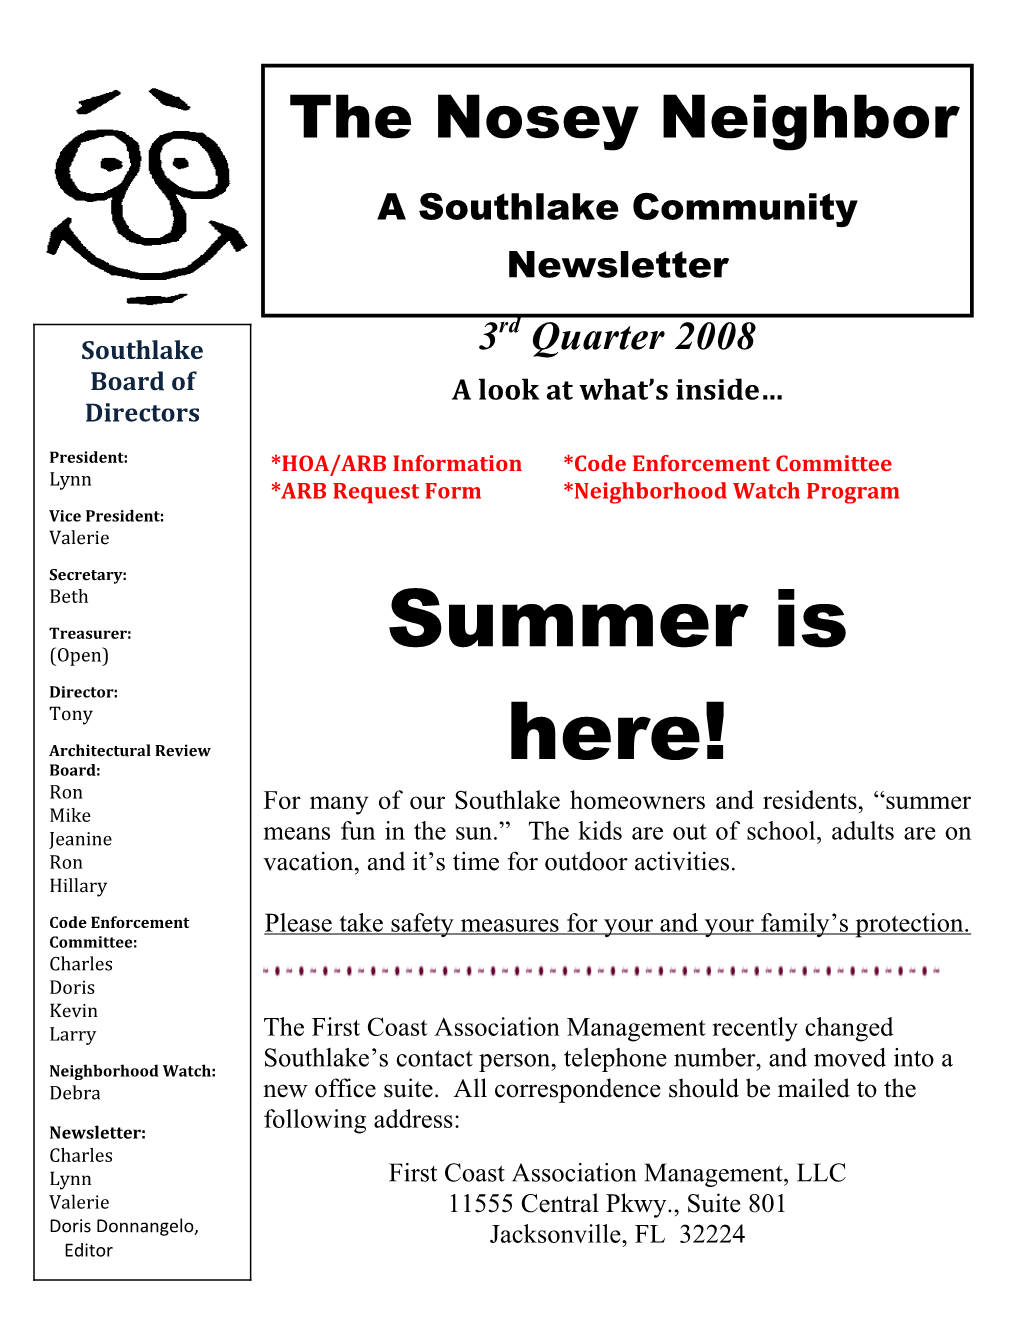 Bylaws of Southlake Homeowners Association, Inc